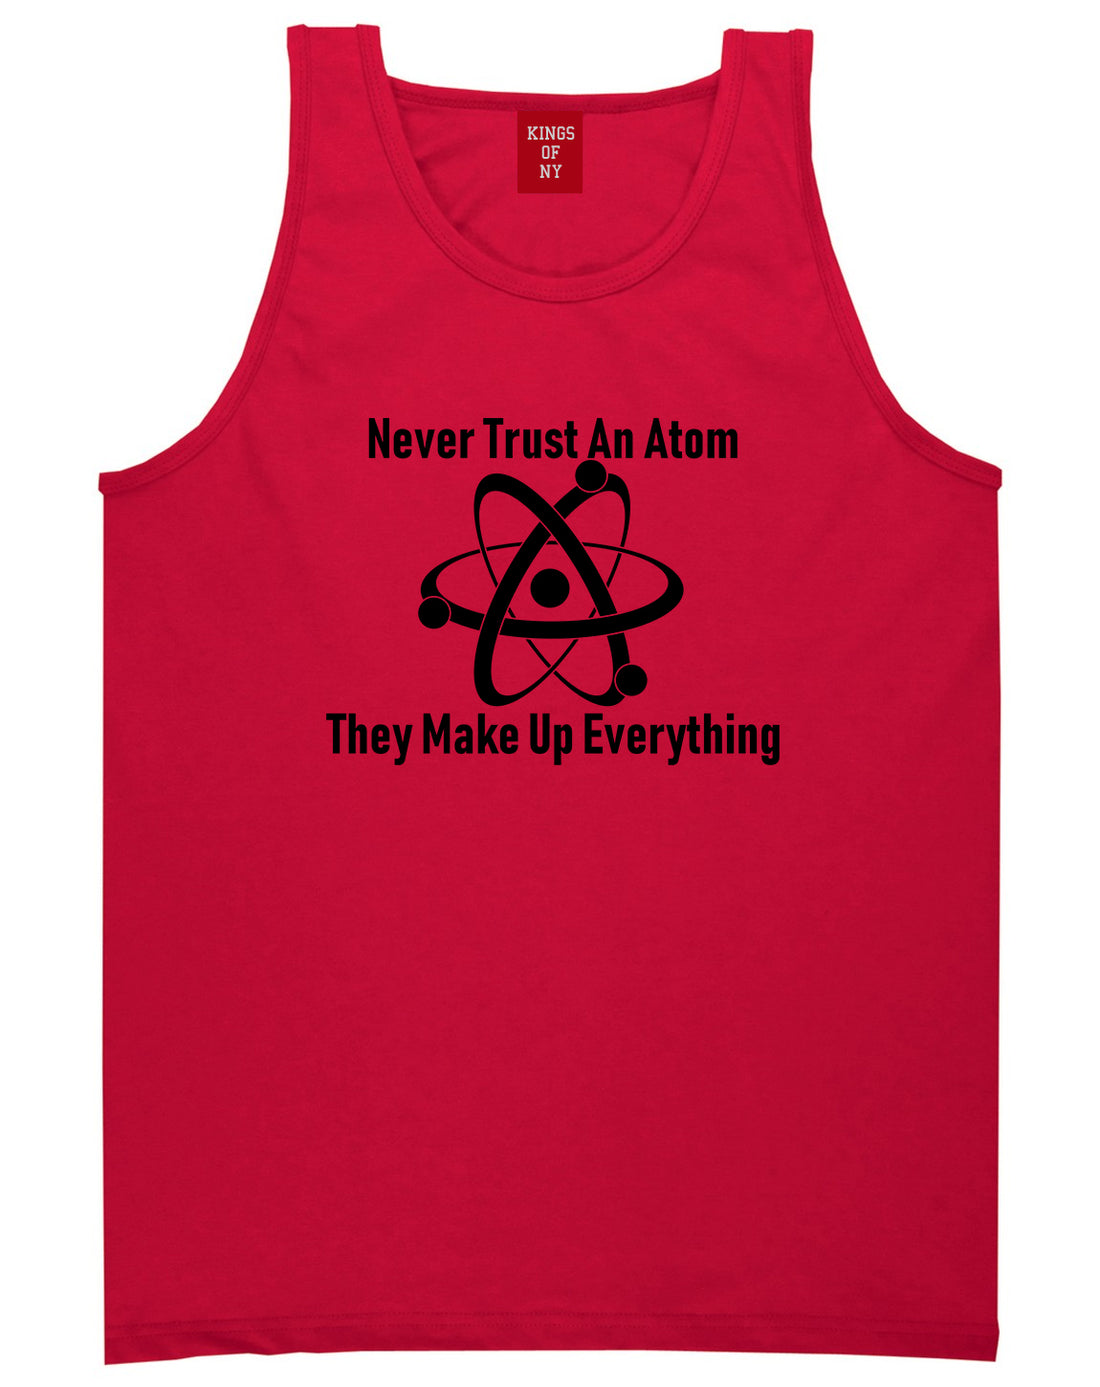 Never Trust An Atom They Make Up Everything Funny Mens Tank Top T-Shirt Red